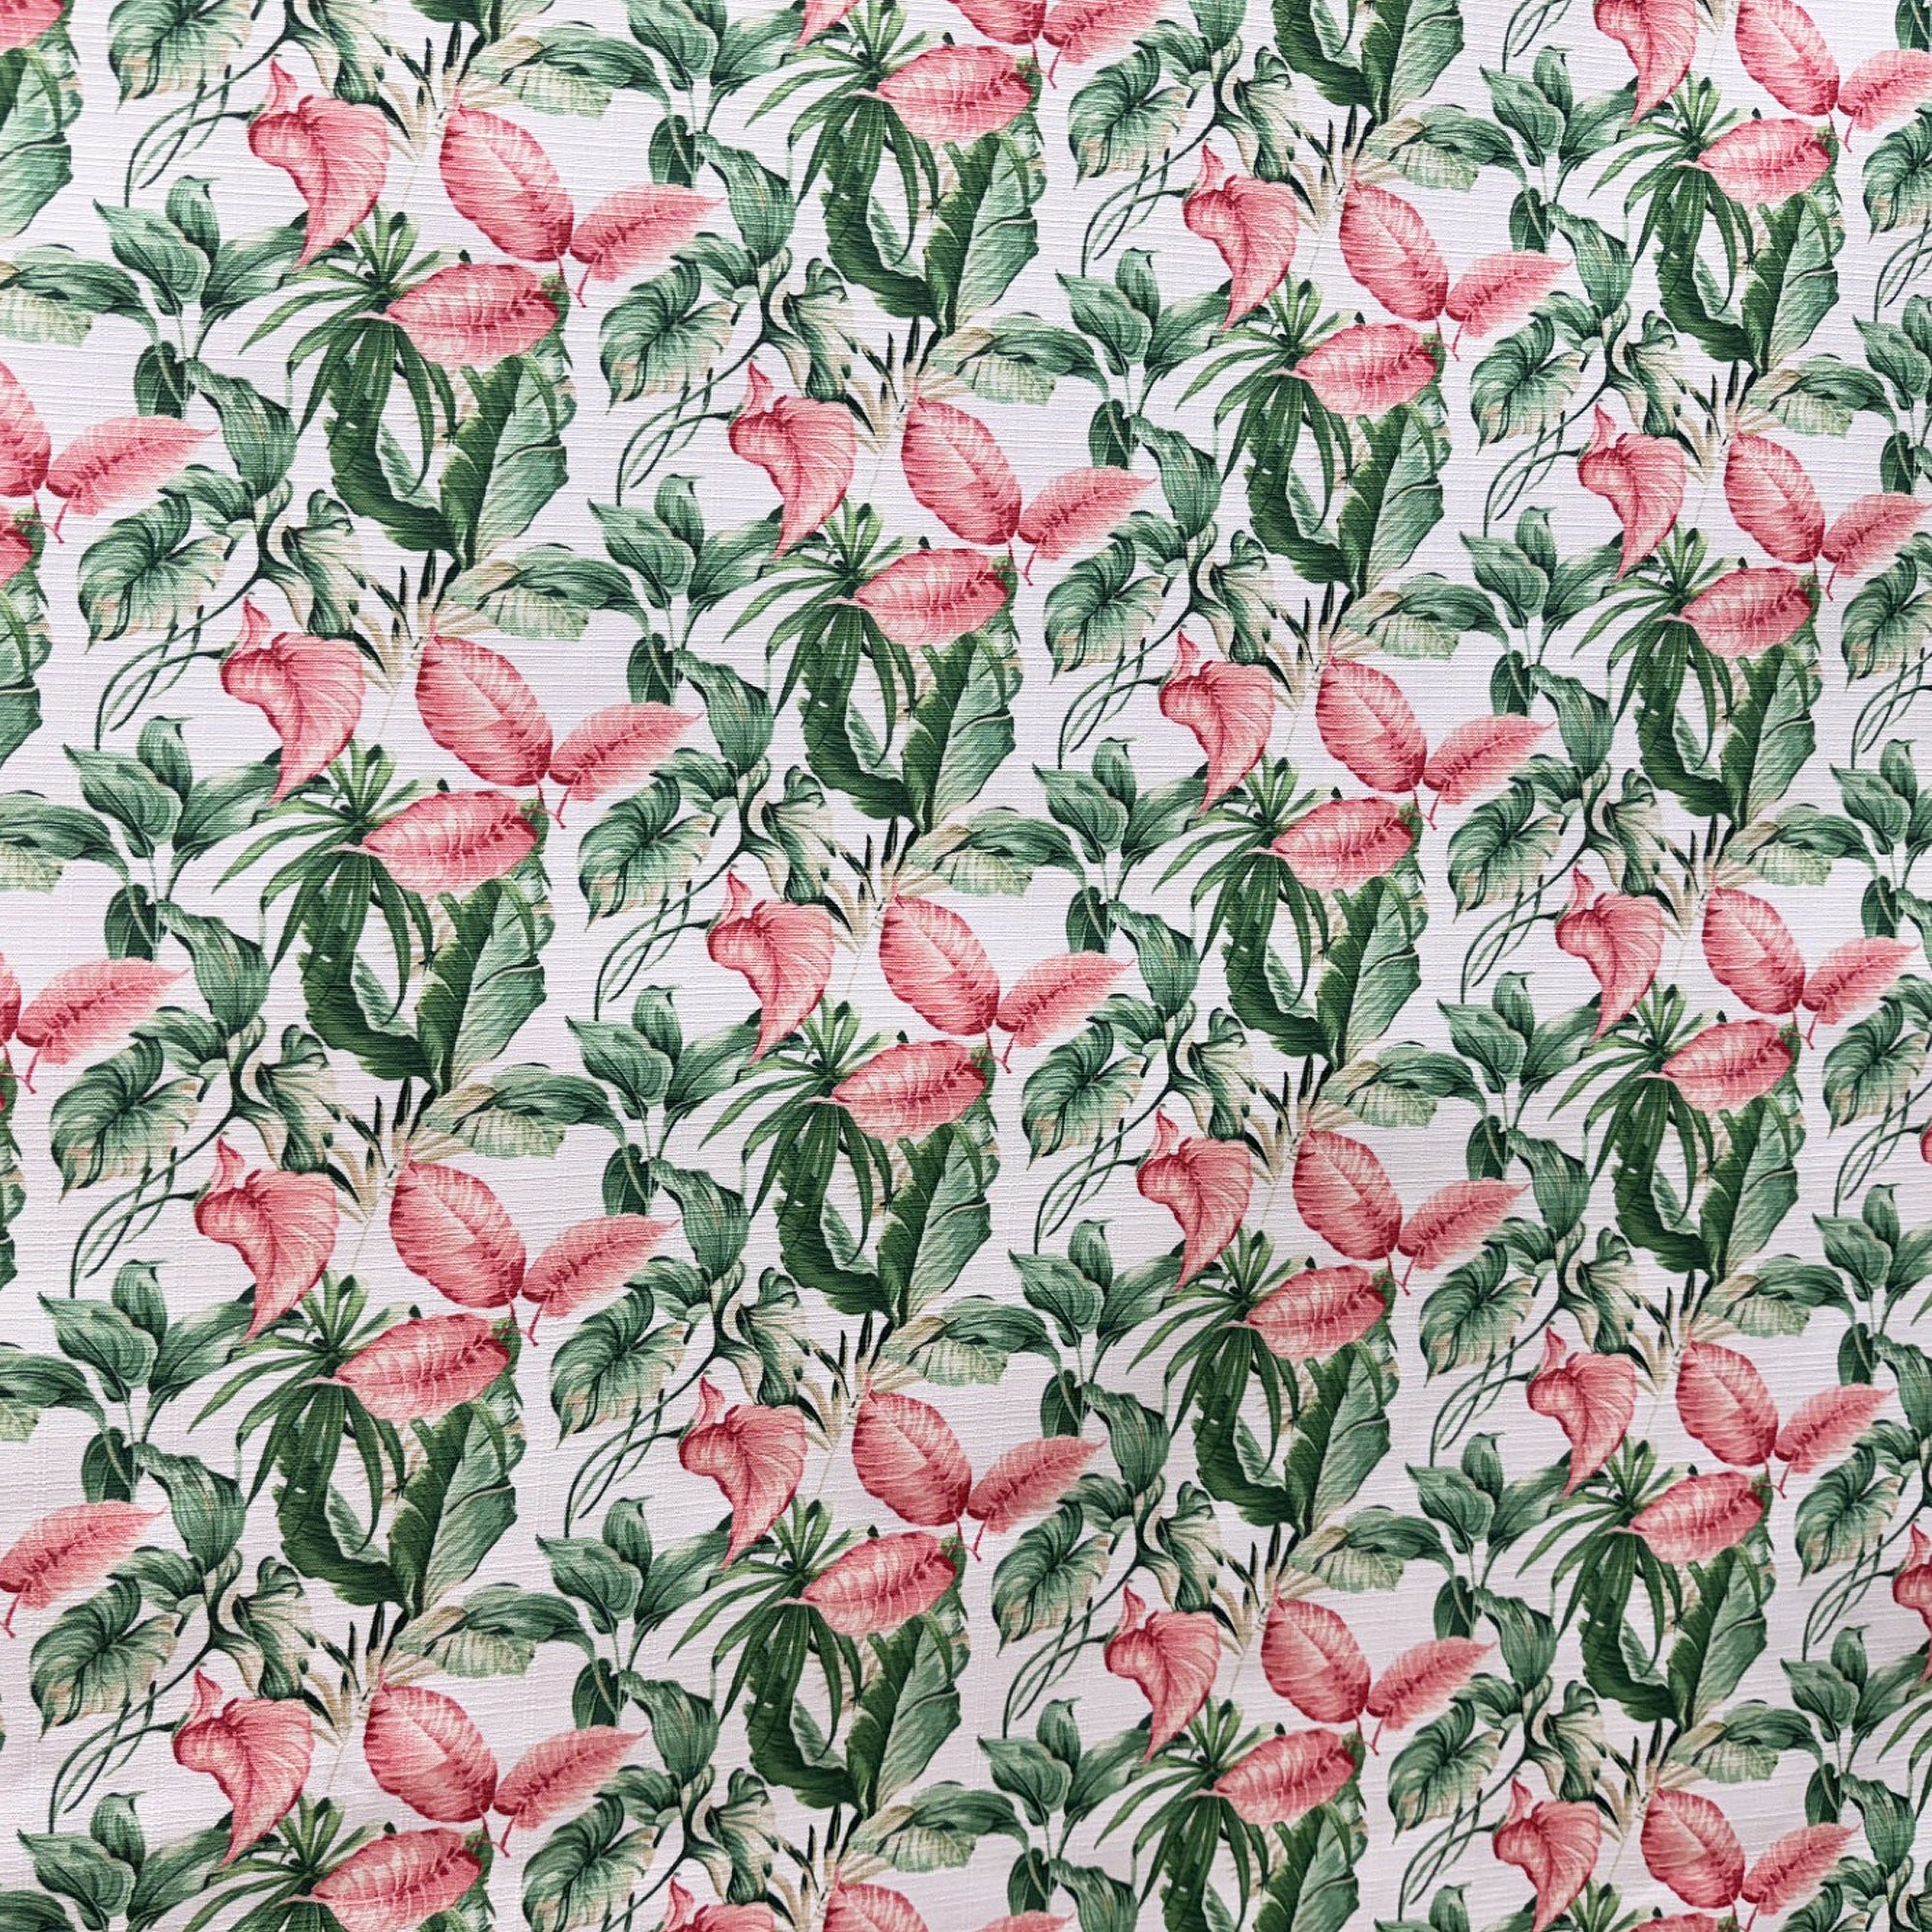 Blissa Fabric | Outdoor Floral Fabric